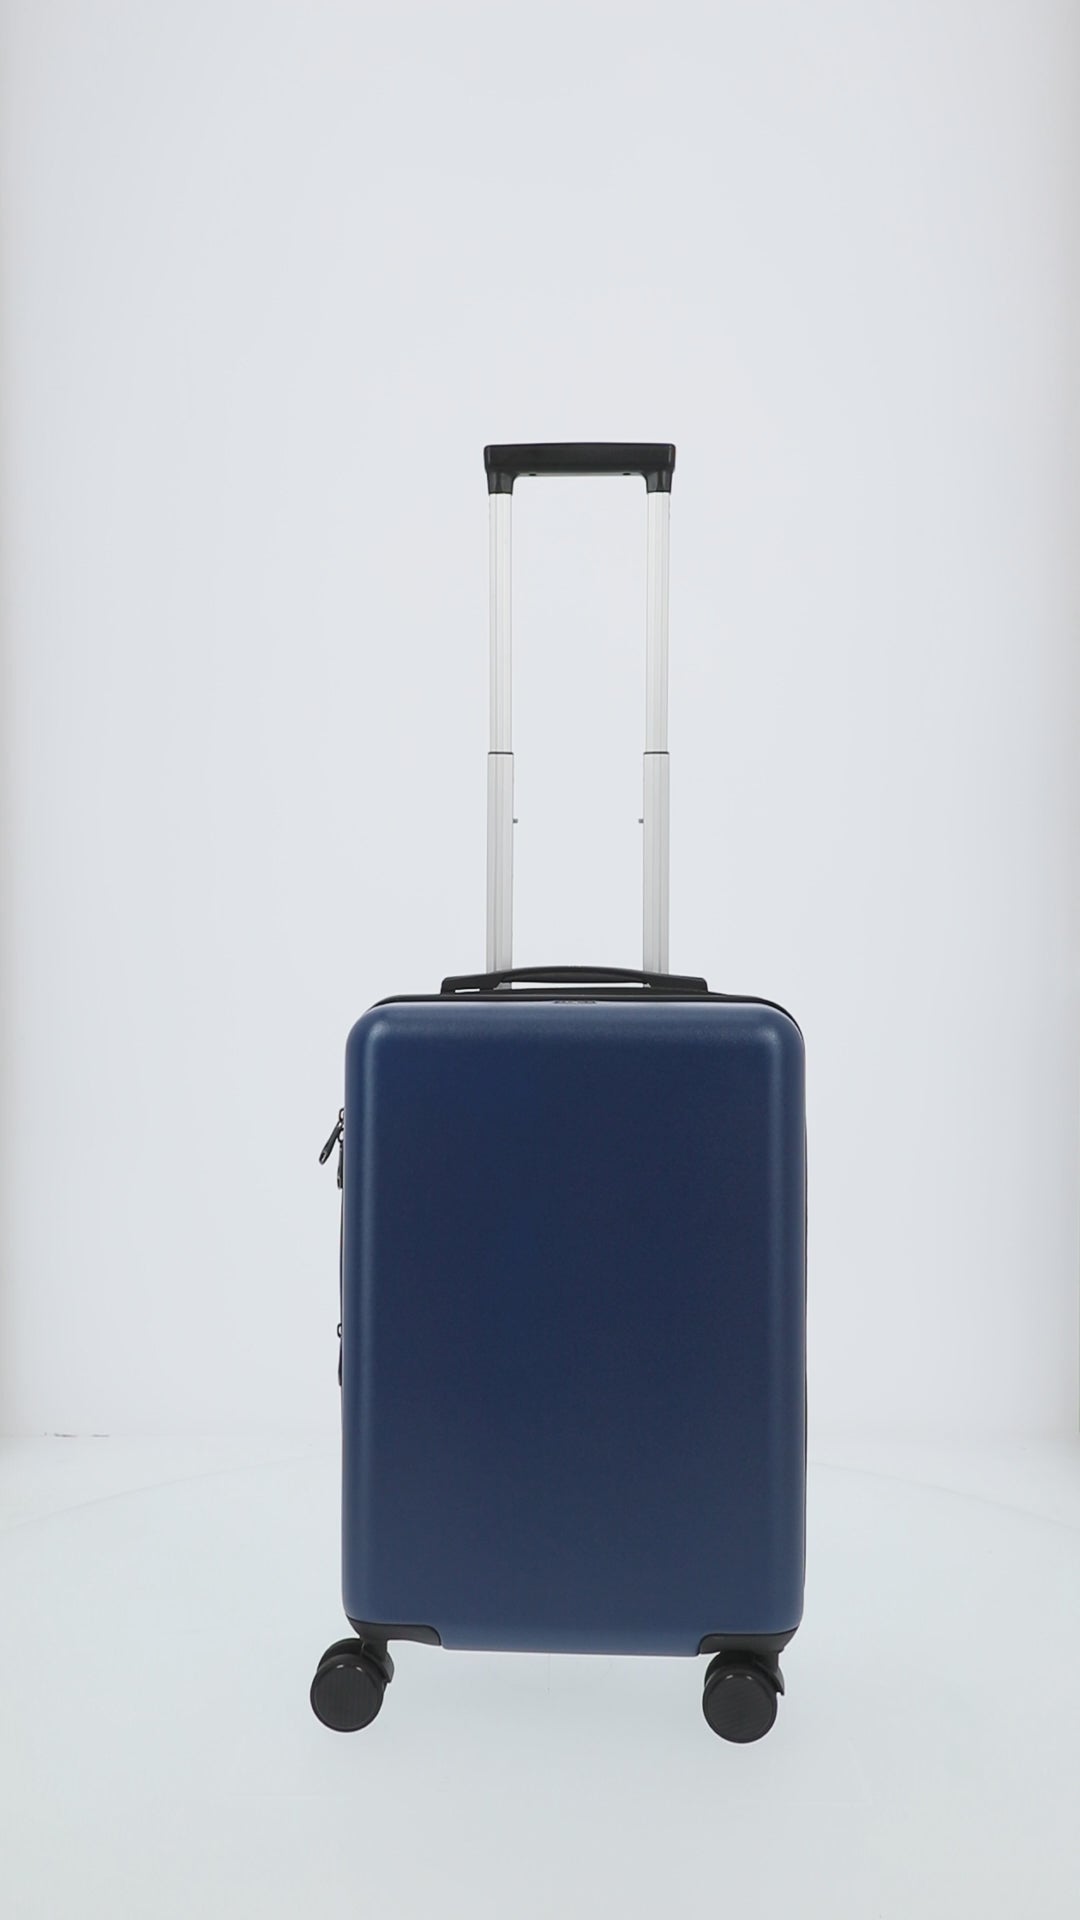 Ful navy blue carry-on spinner suitcase luggage 22-inch